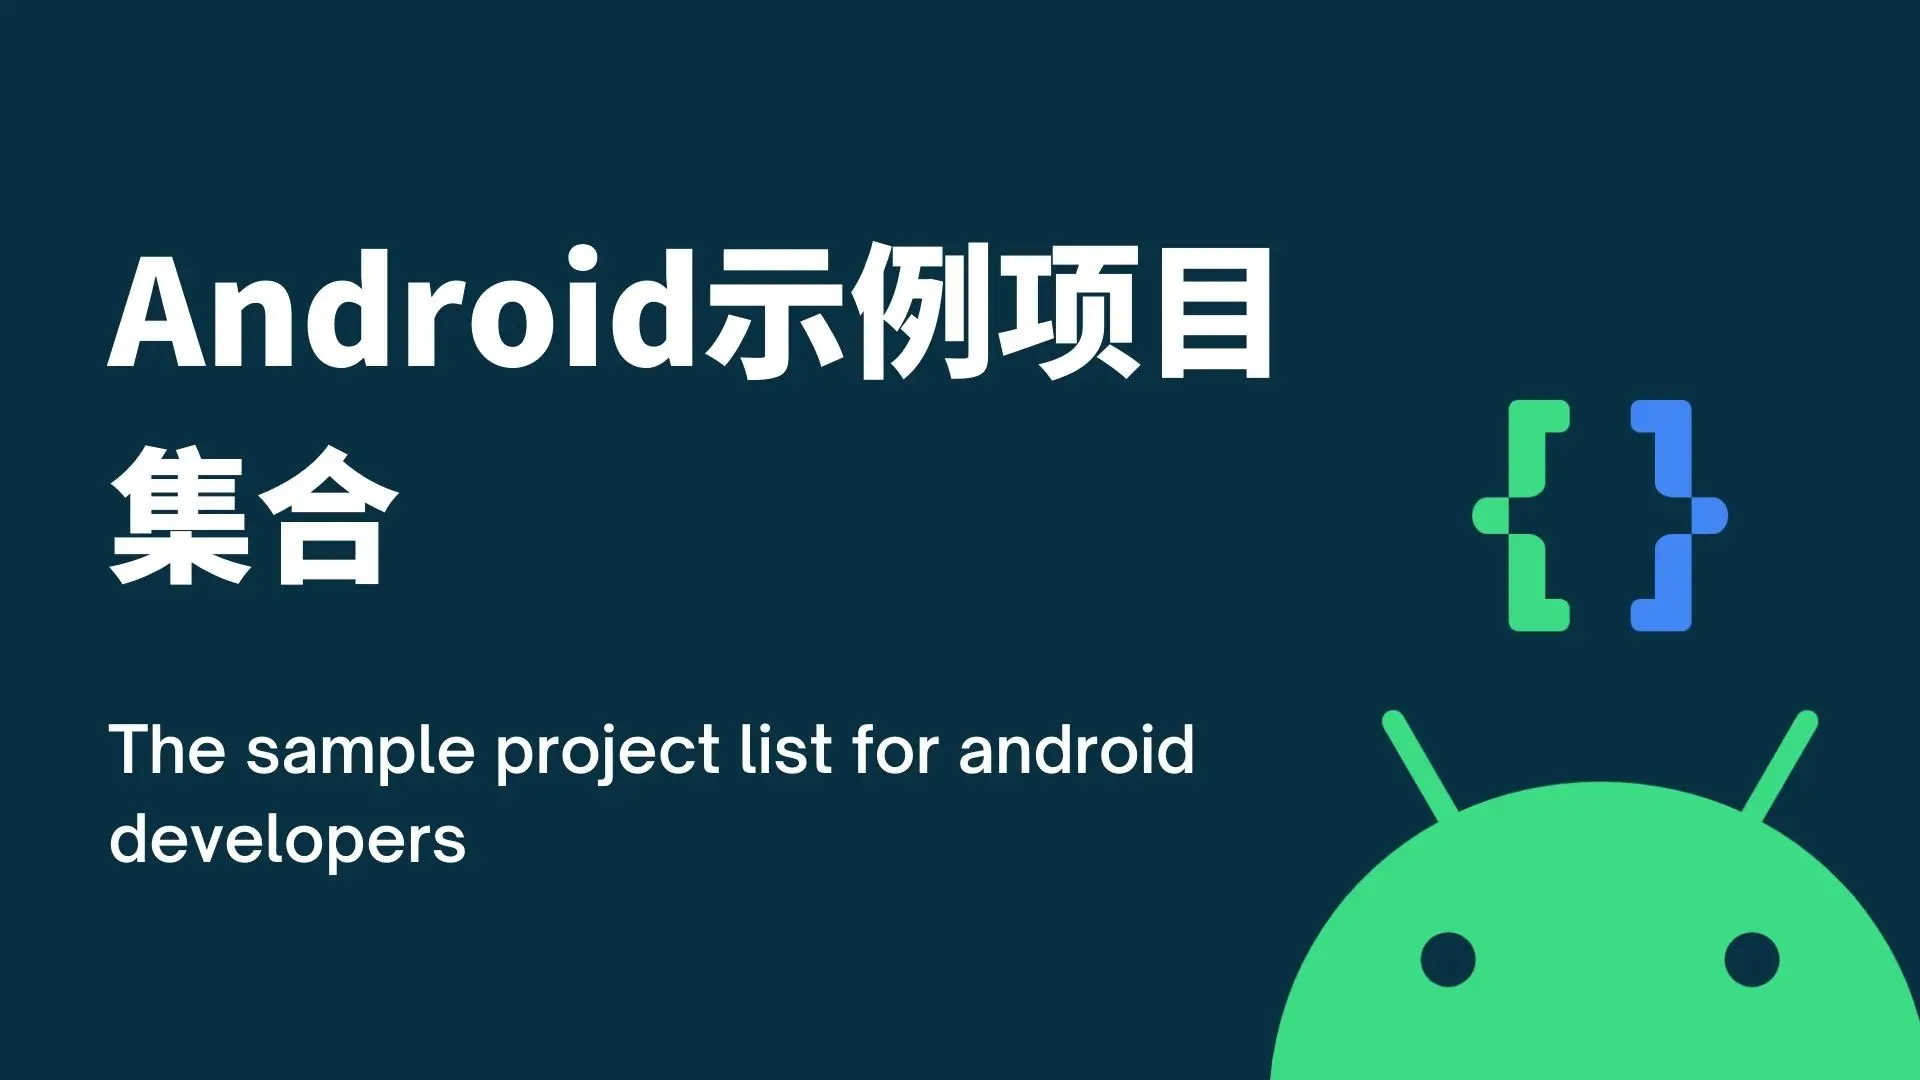 Android示例项目集合